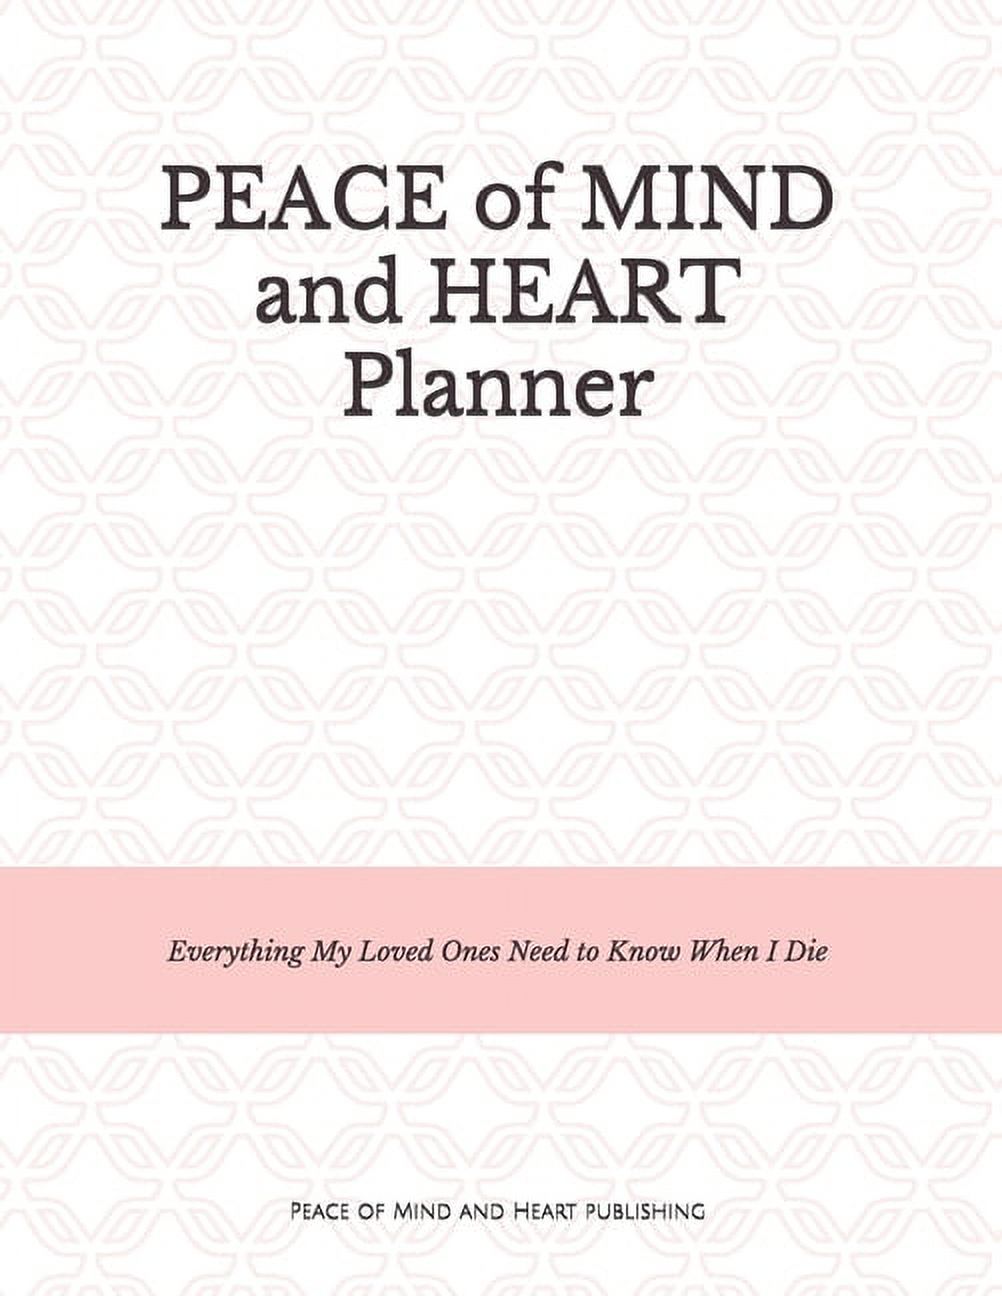 Peace of Mind and Heart Planner: End of Life Organizer and Checklist *A Workbook of Everything My Loved Ones Need to Know When I Die* (Funeral Details, Estate Planning, Final Wishes 8.5 X 11) [Book]